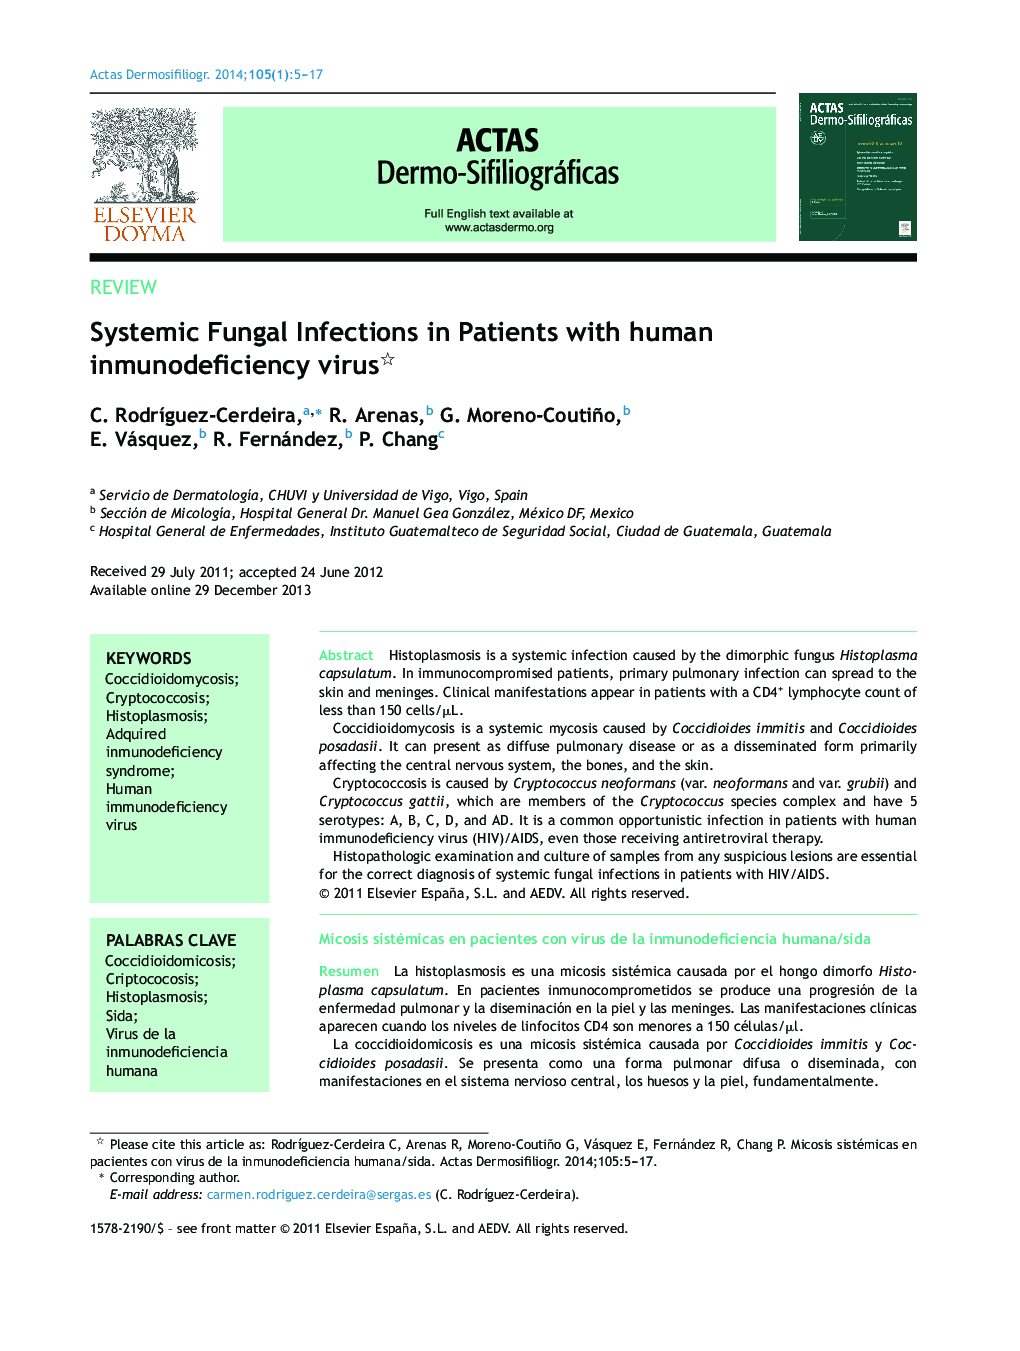 Systemic Fungal Infections in Patients with human inmunodeficiency virus 